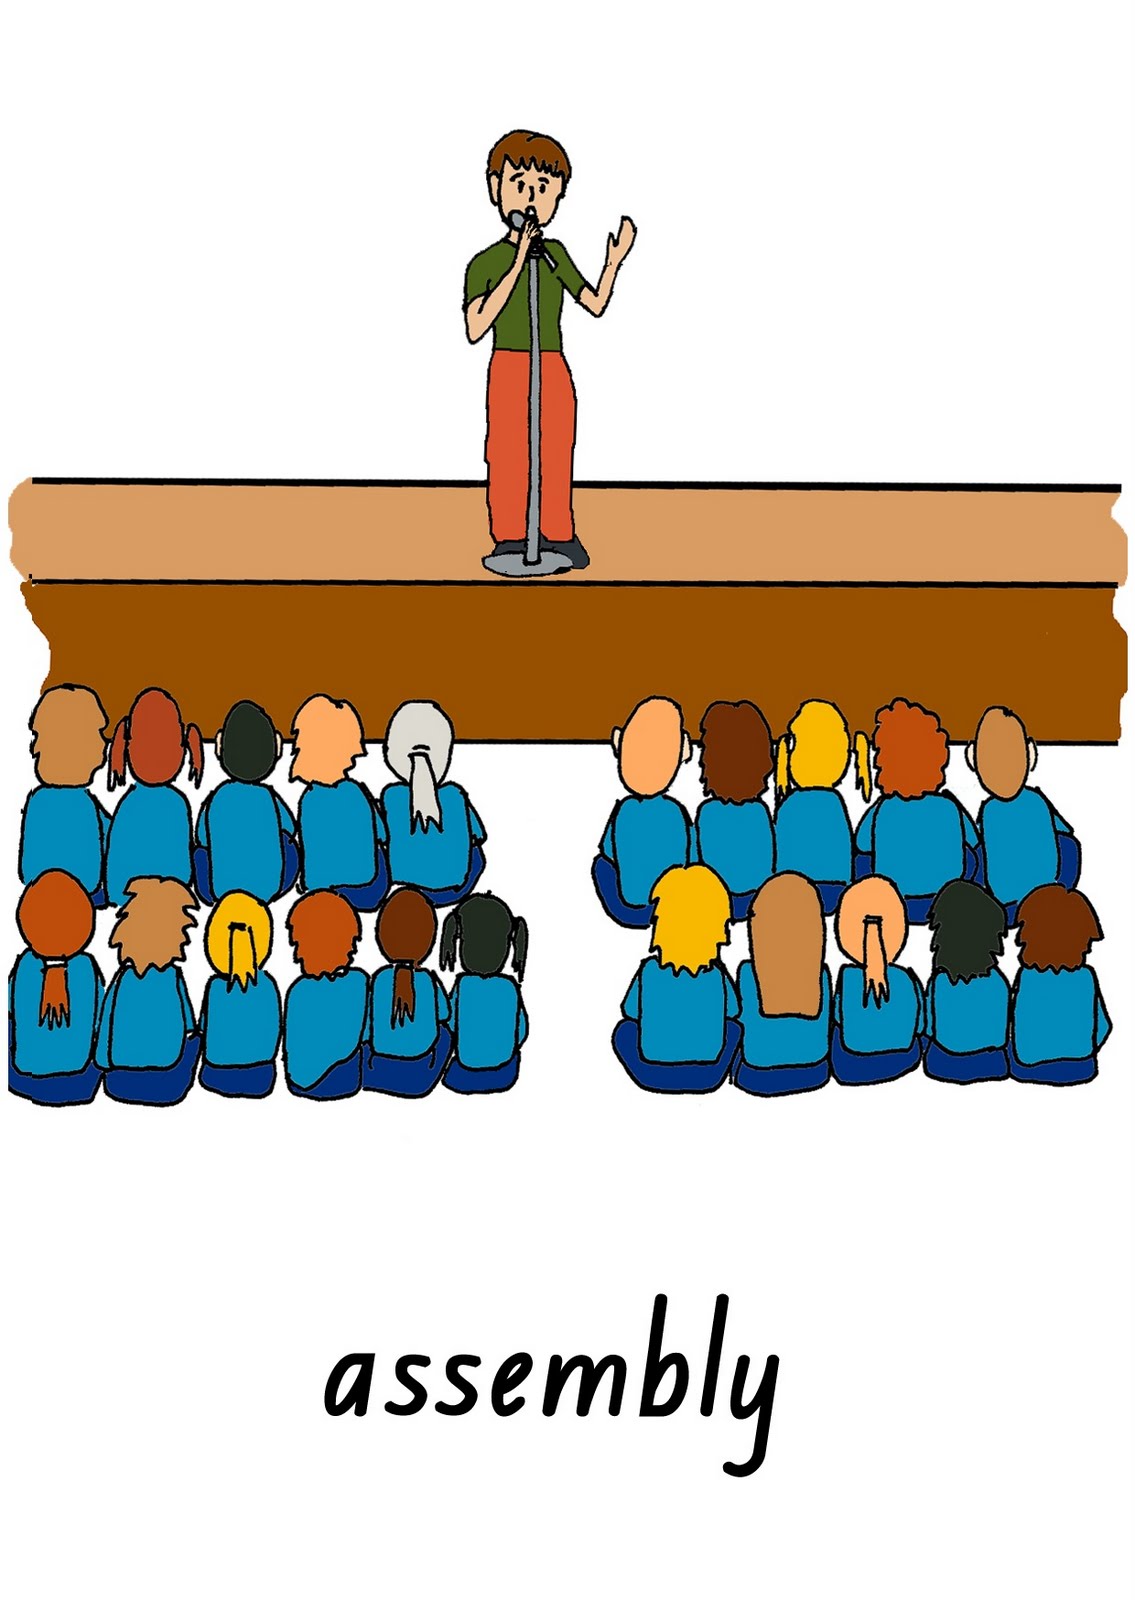 School assembly clipart free - Clip Art Library
 Elementary School Assembly Clipart